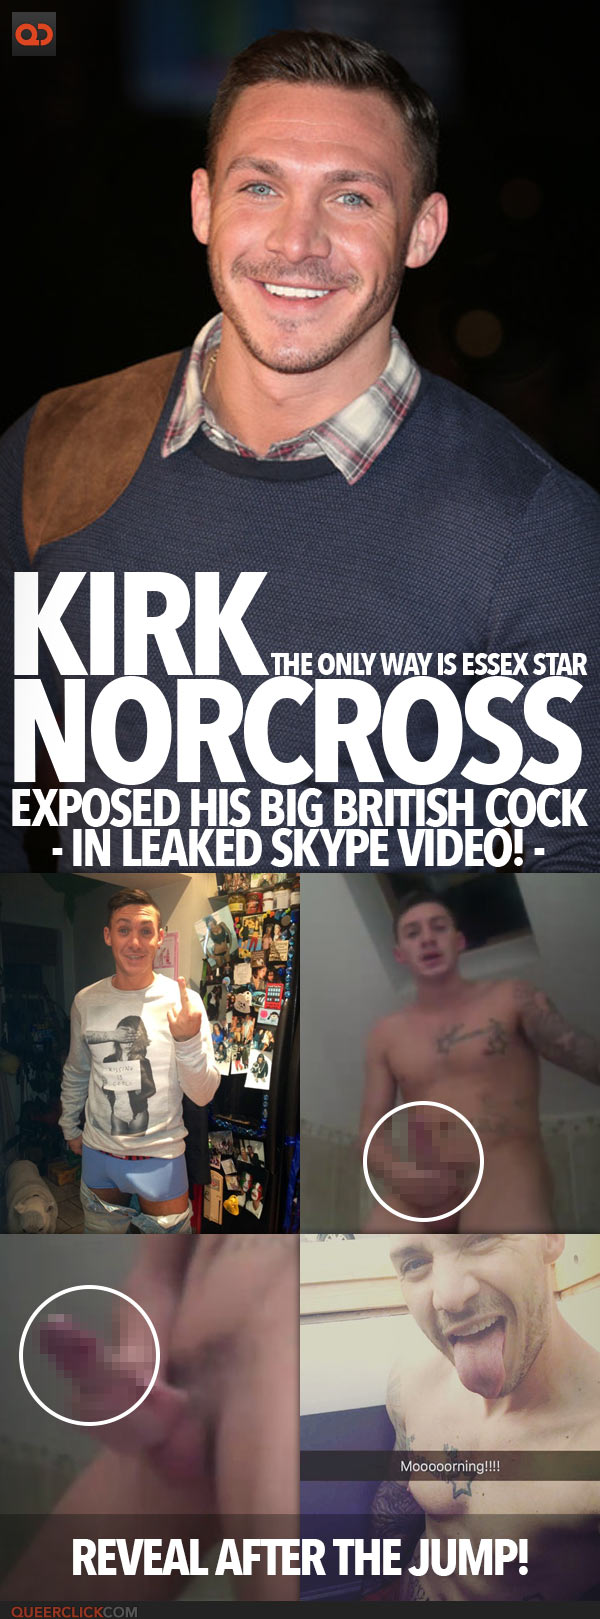 Kirk Norcross From The Only Way Is Essex Exposed His Big British Cock In Leaked Skype Video